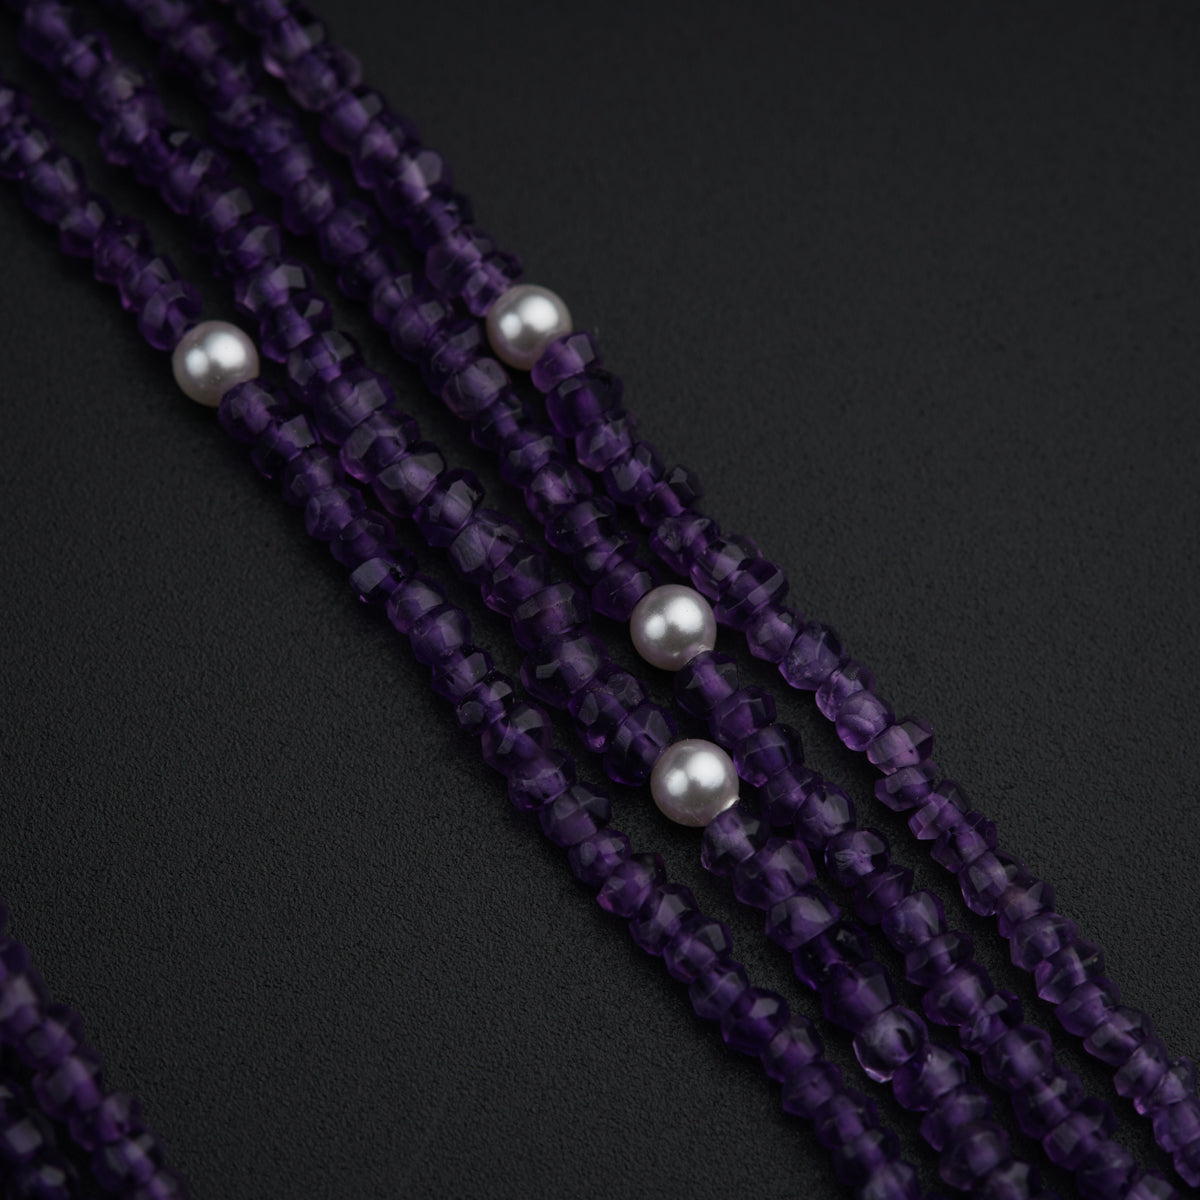 Classic Silver Tanmani Set with Amethyst and High Quality Pearls